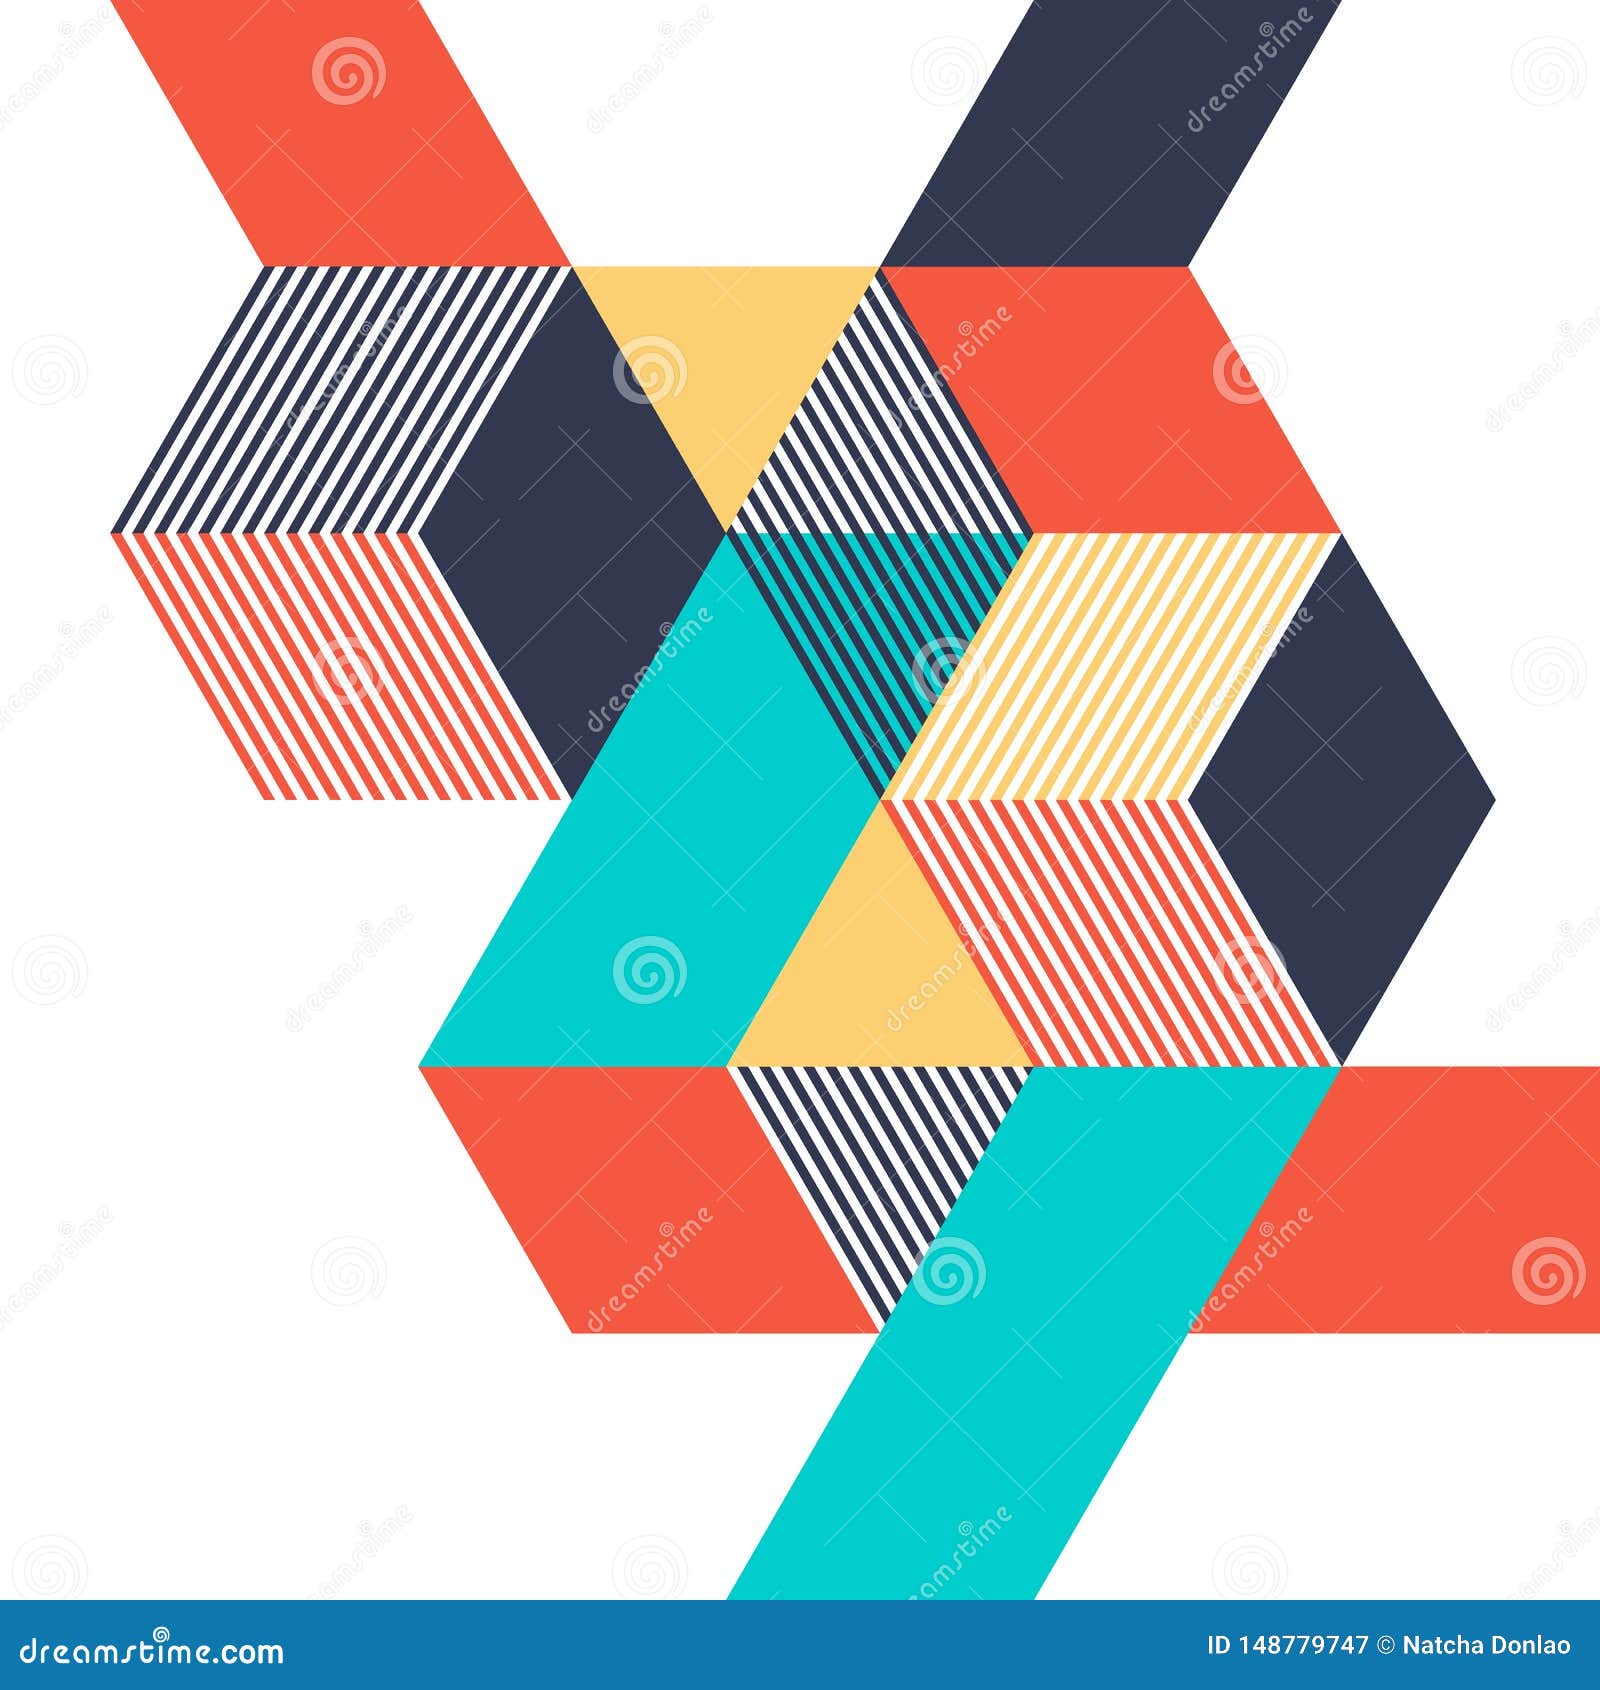 abstract geometric isometric  layout  template background modern art style